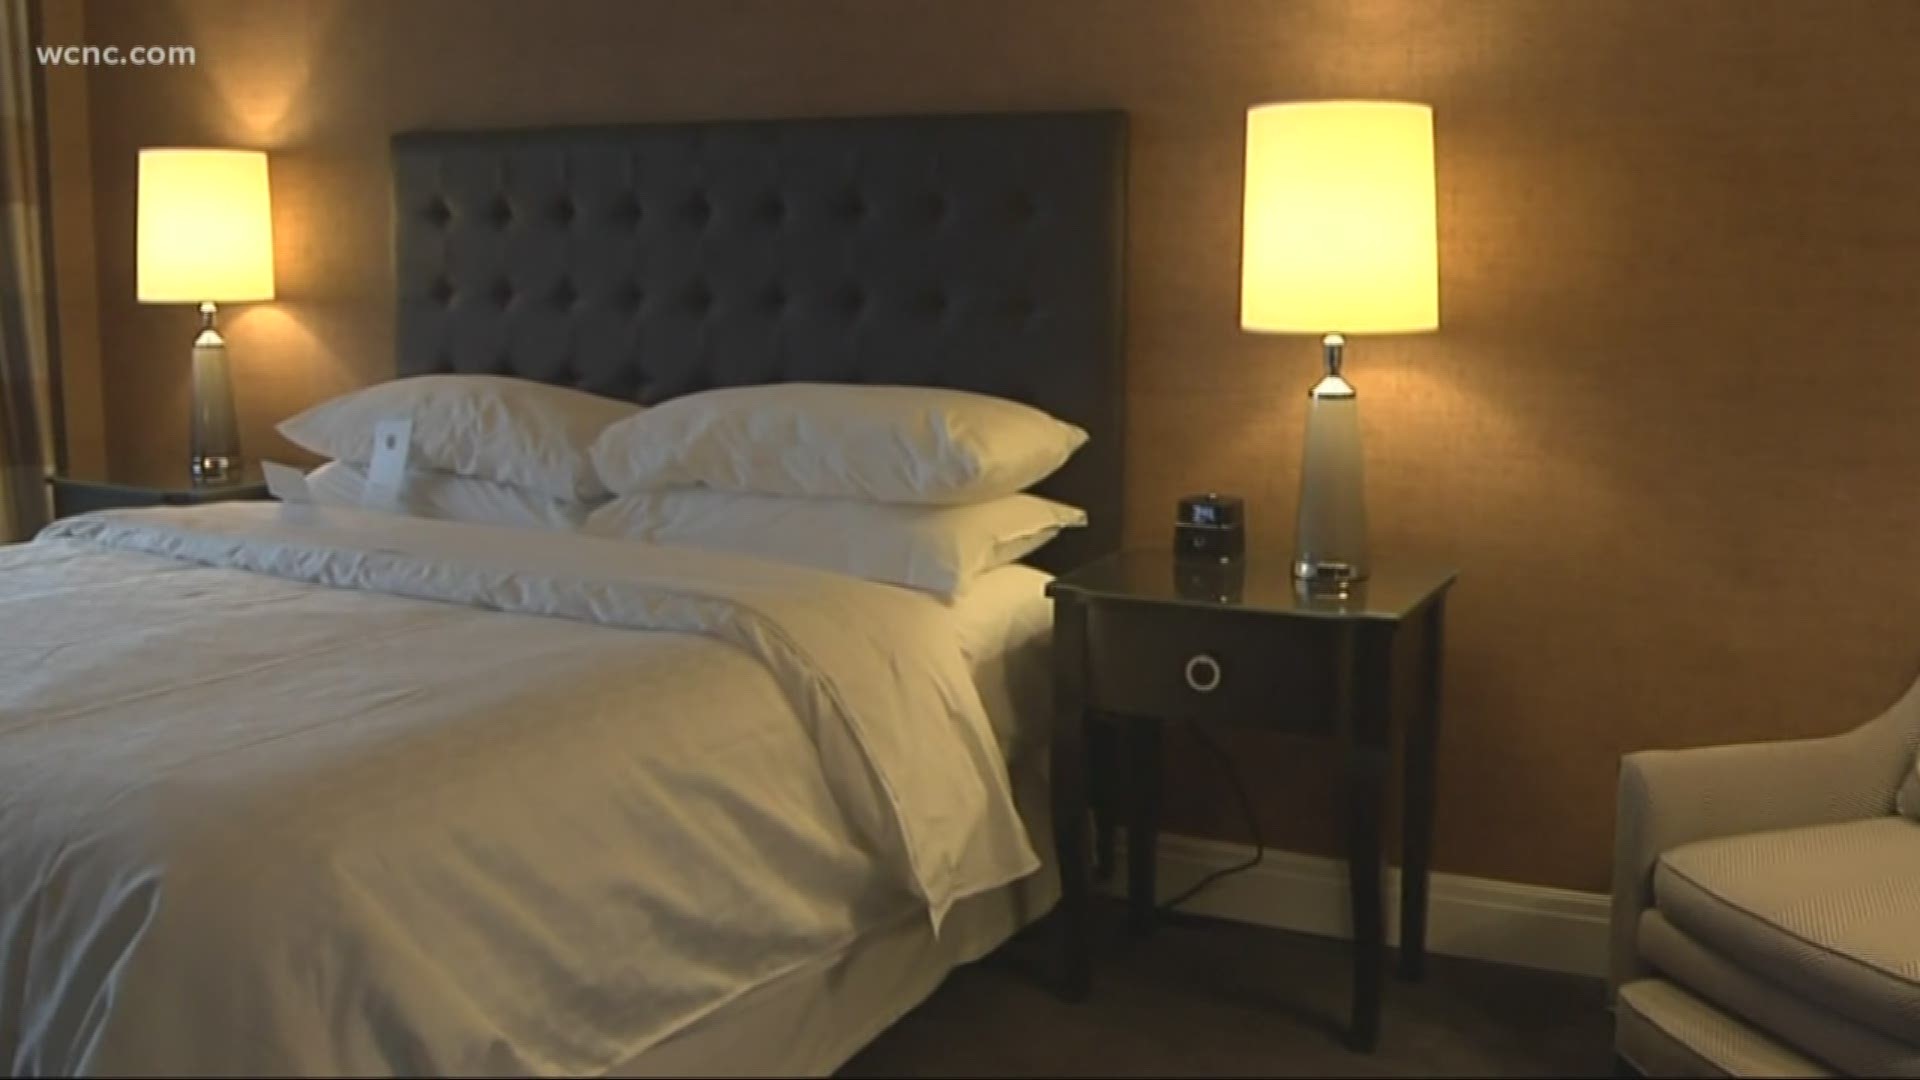 The Queen City has another reason to be proud. According to a recent study from AAA, Charlotte is in the top five for the cleanest hotel rooms in the country.